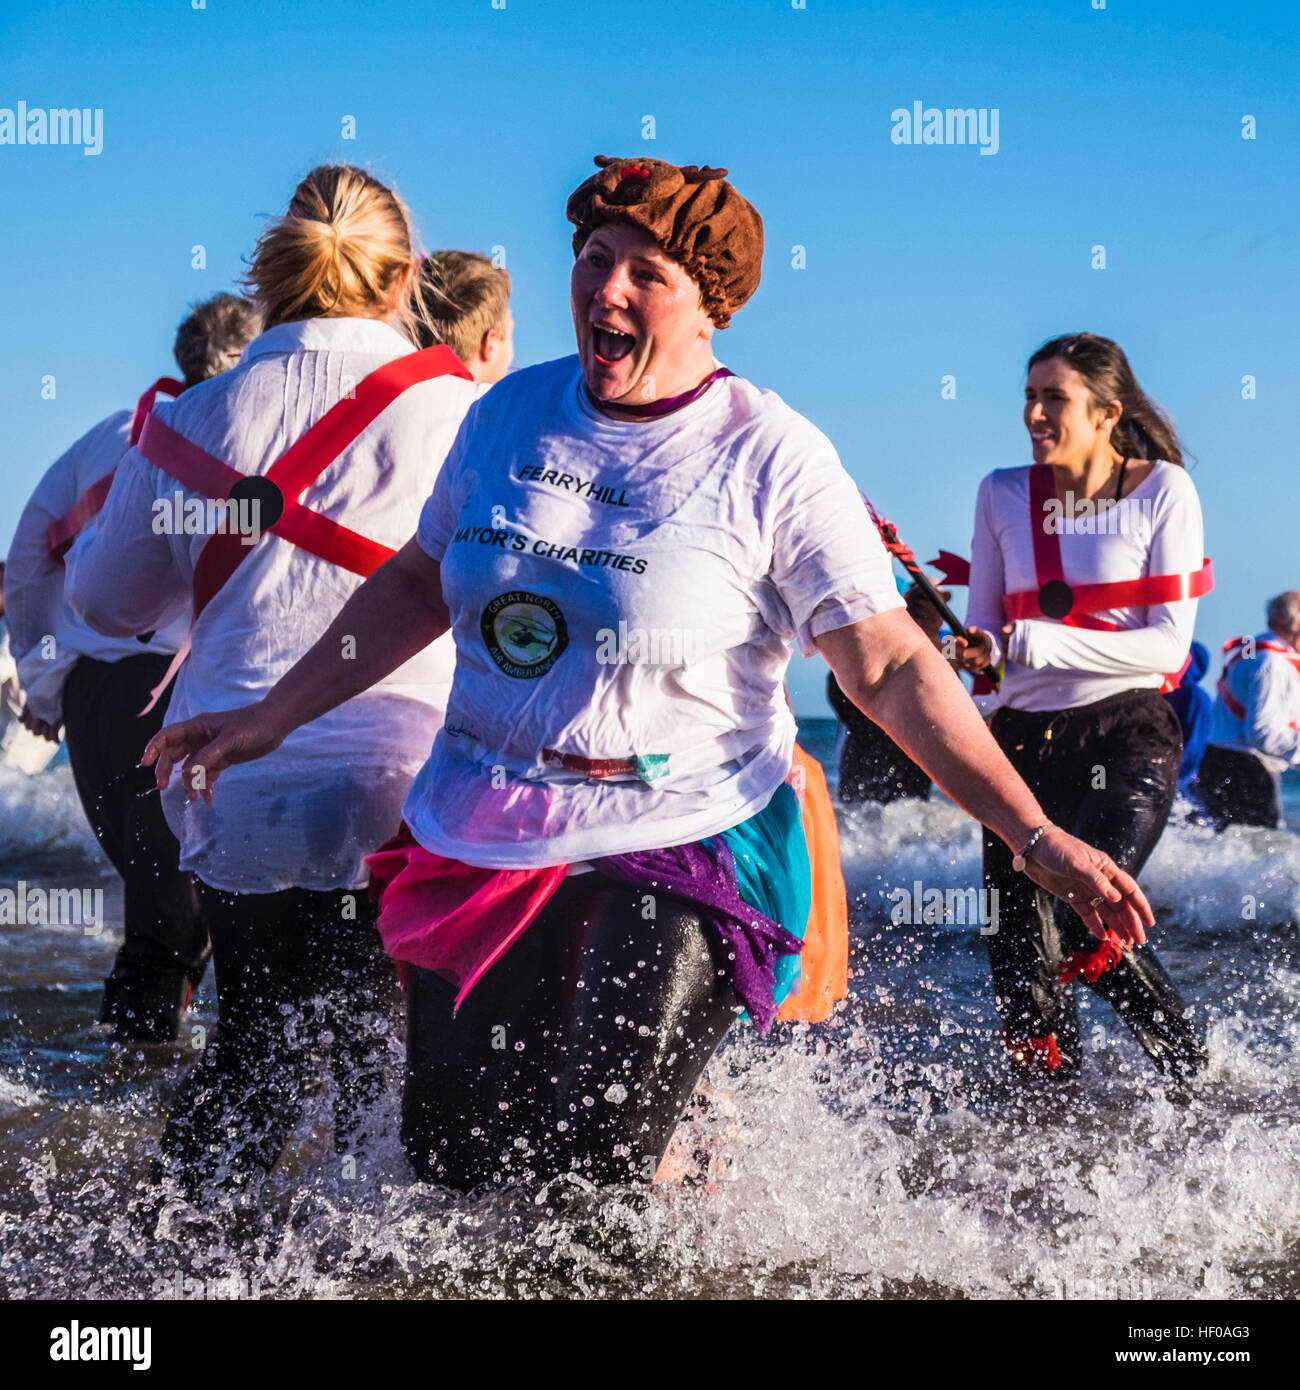 Hardy souls take to the North Sea in fancy dress in Sunderland's annual Boxing Day Dip. The dip is arranged by the Sunderland Lions Club and raises money for charity. (c) Paul Swinney/Alamy Live News Stock Photo